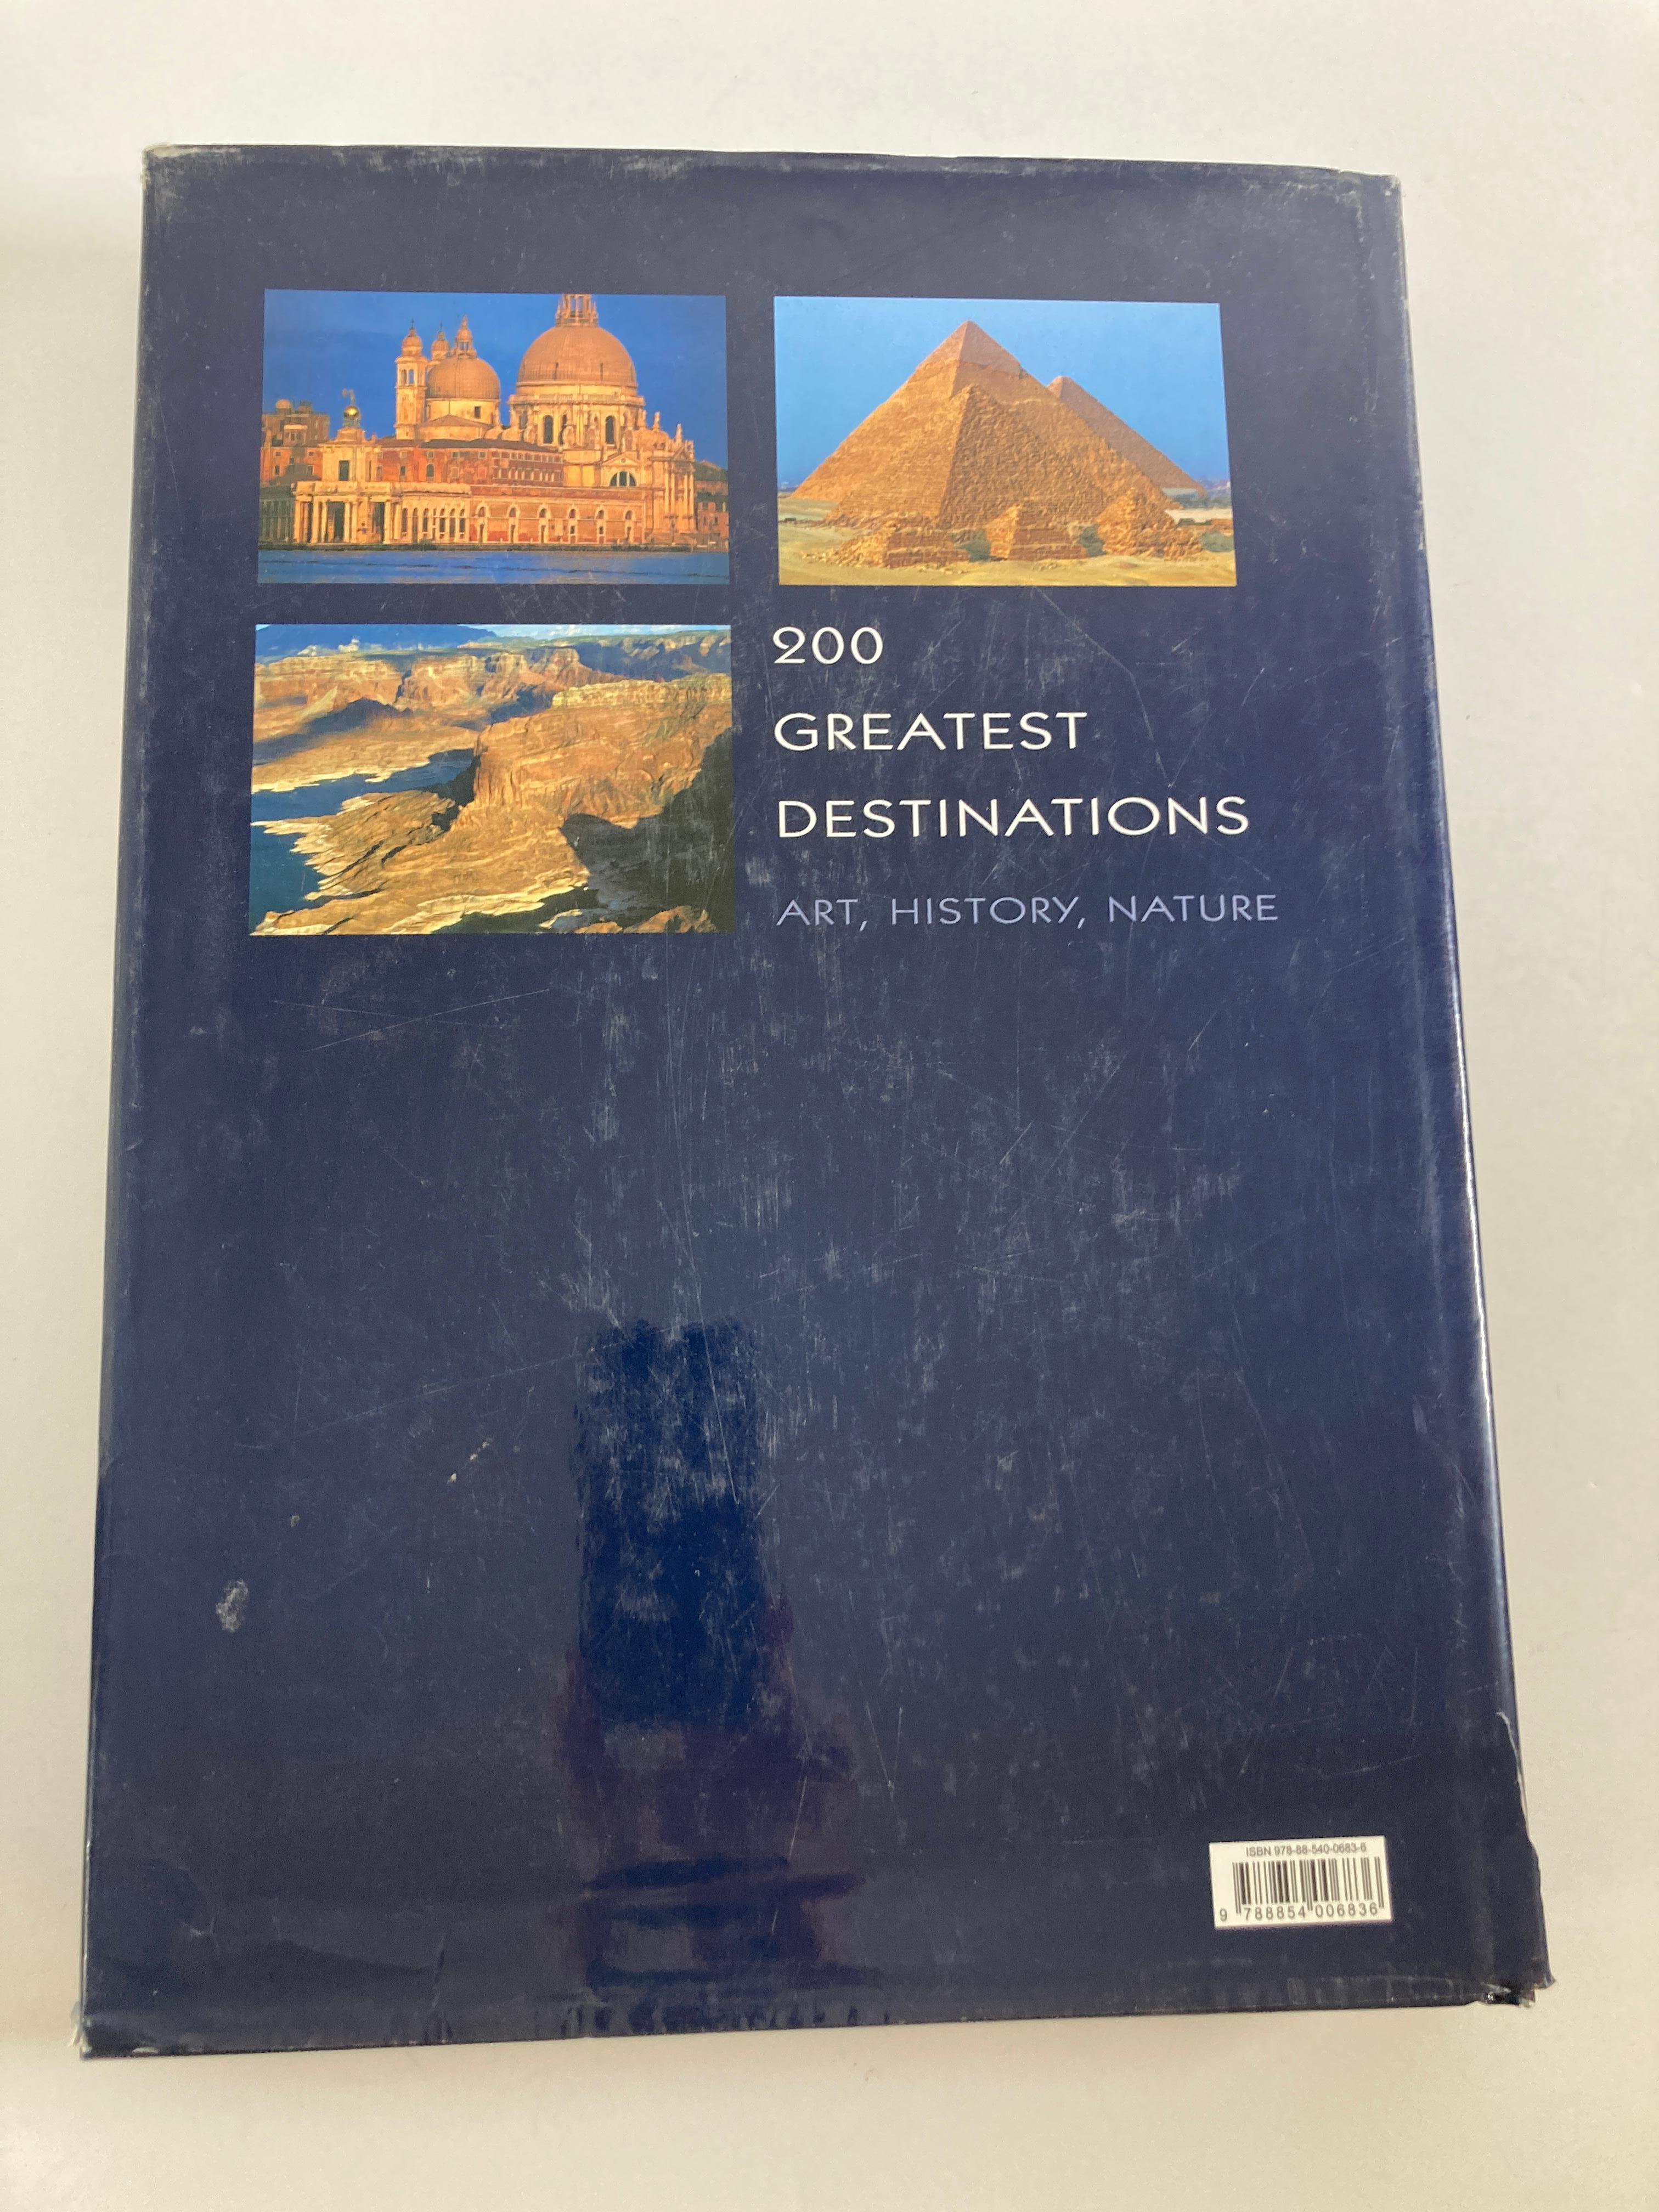 Modern 200 Great Destinations Art, History, Nature Cattaneo, Marco, Coffee Table Book